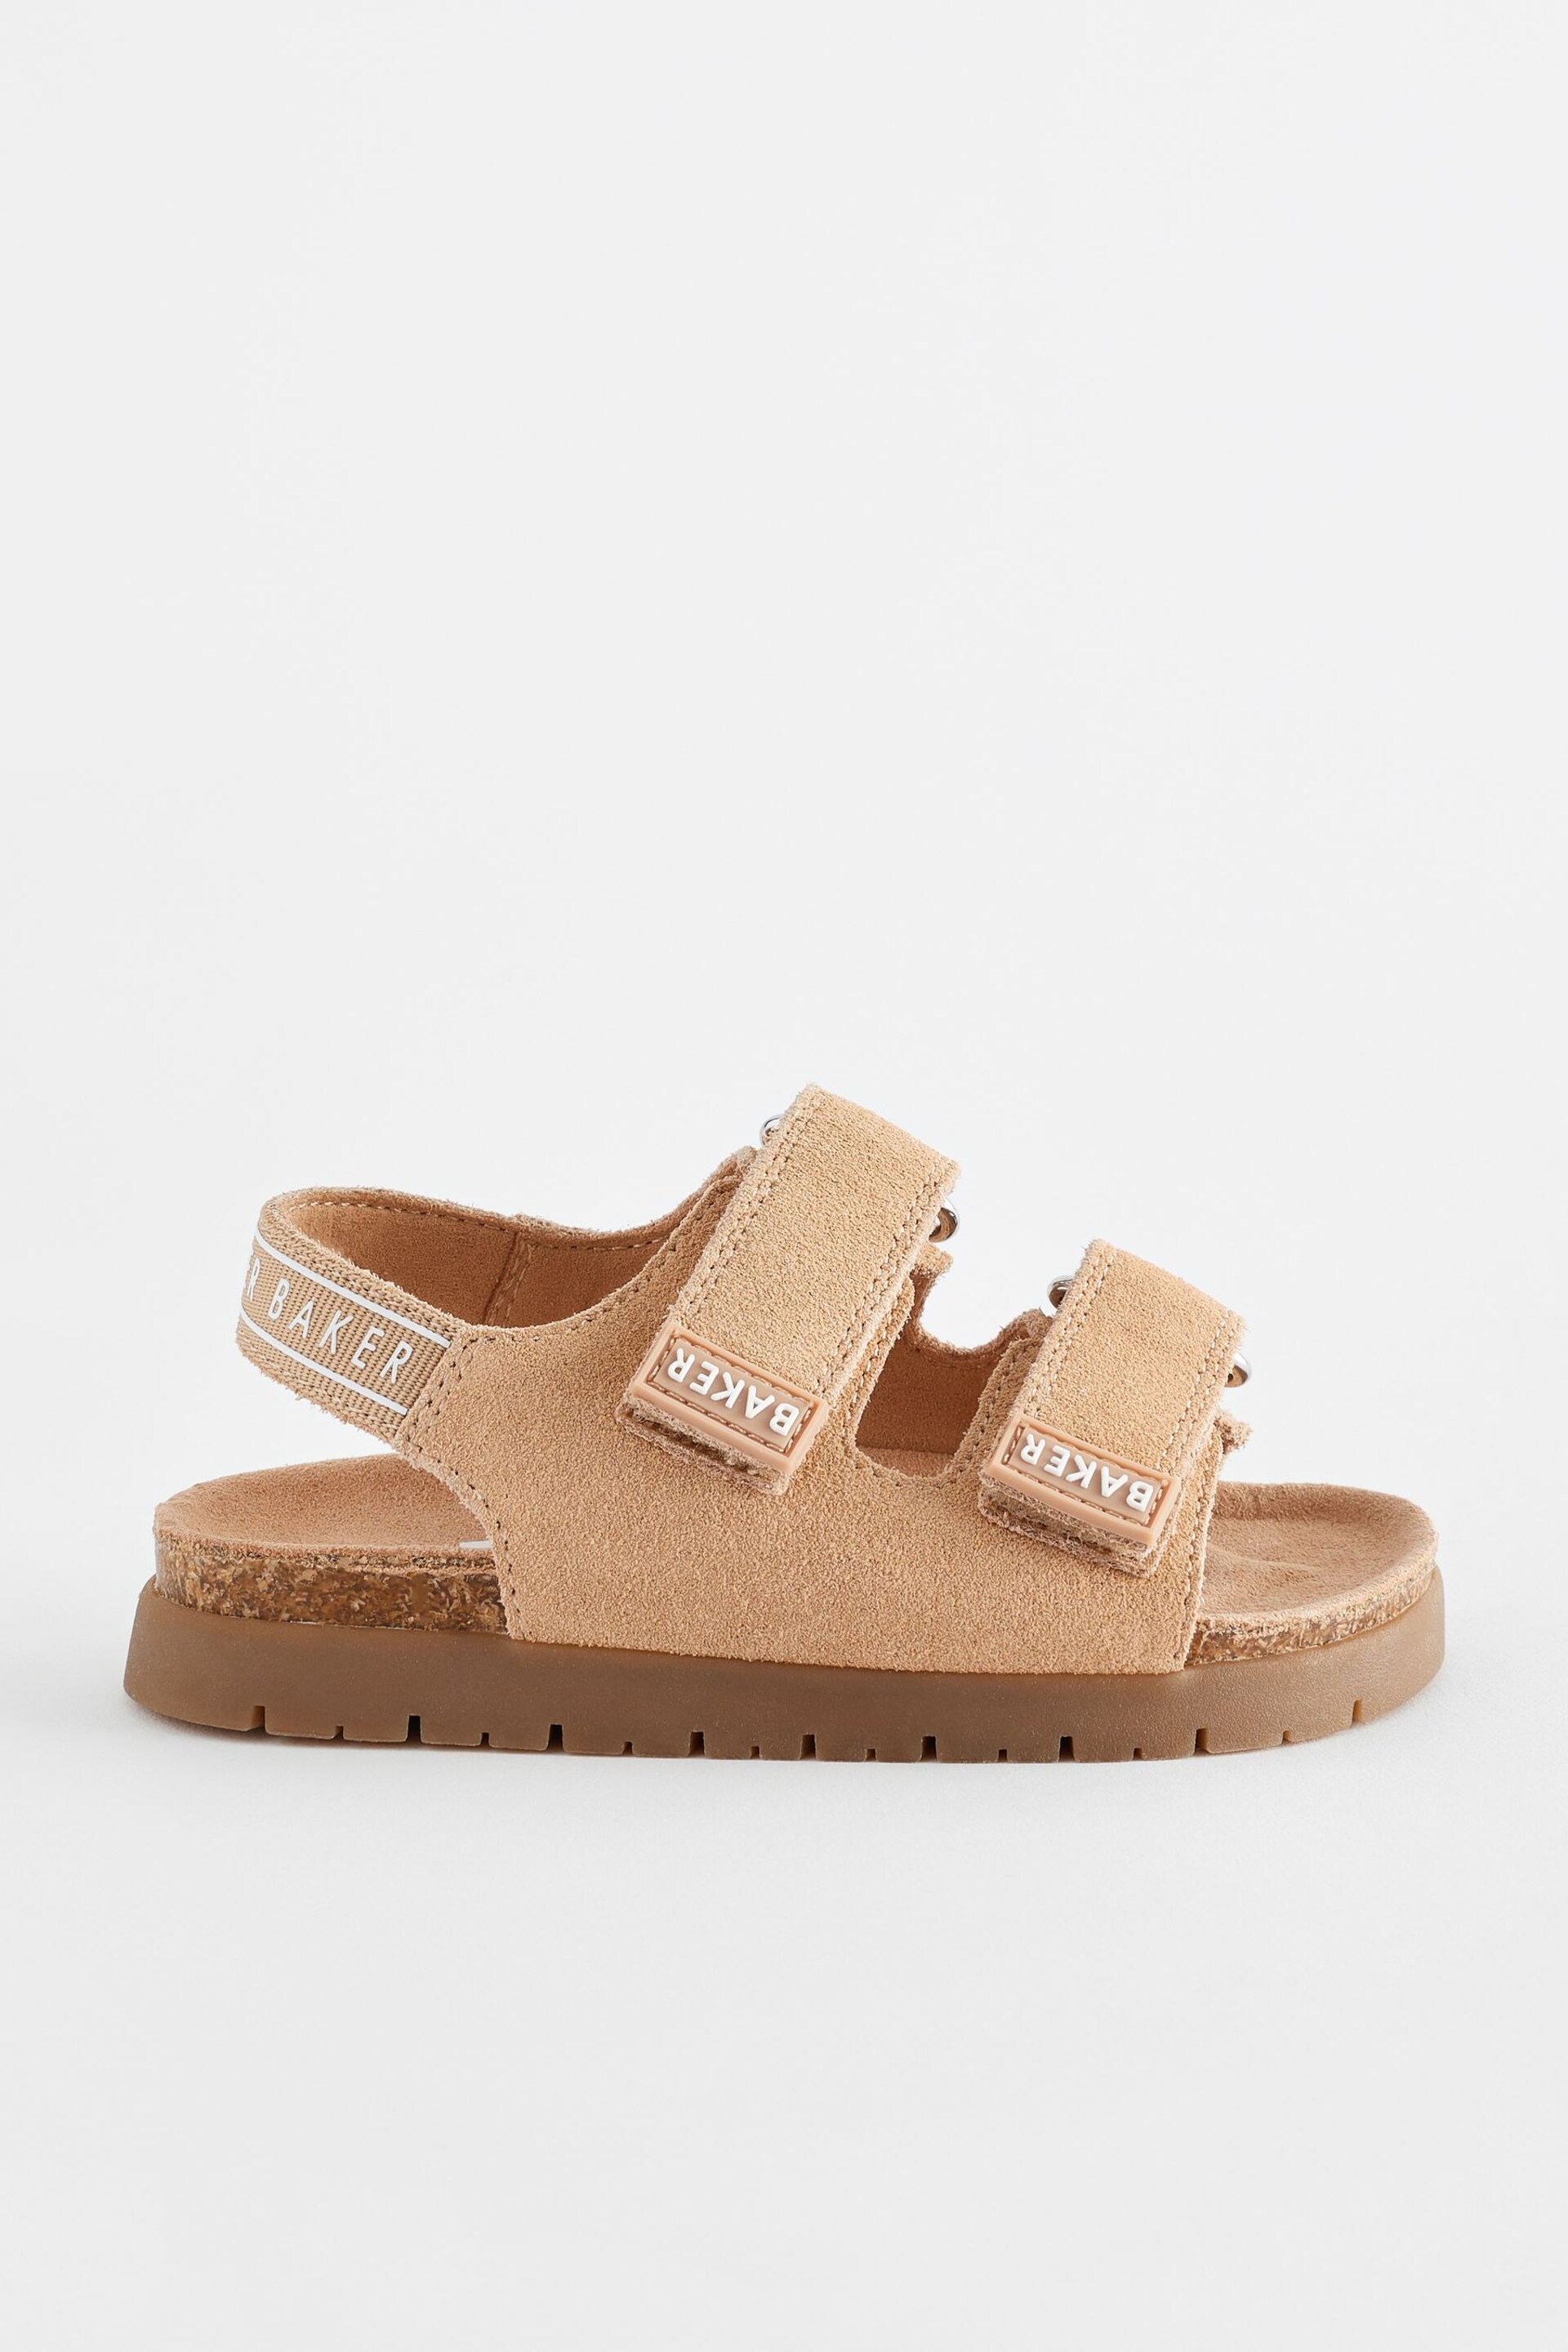 Baker by Ted Baker Boys Suede Footbed Sandals - Image 2 of 6